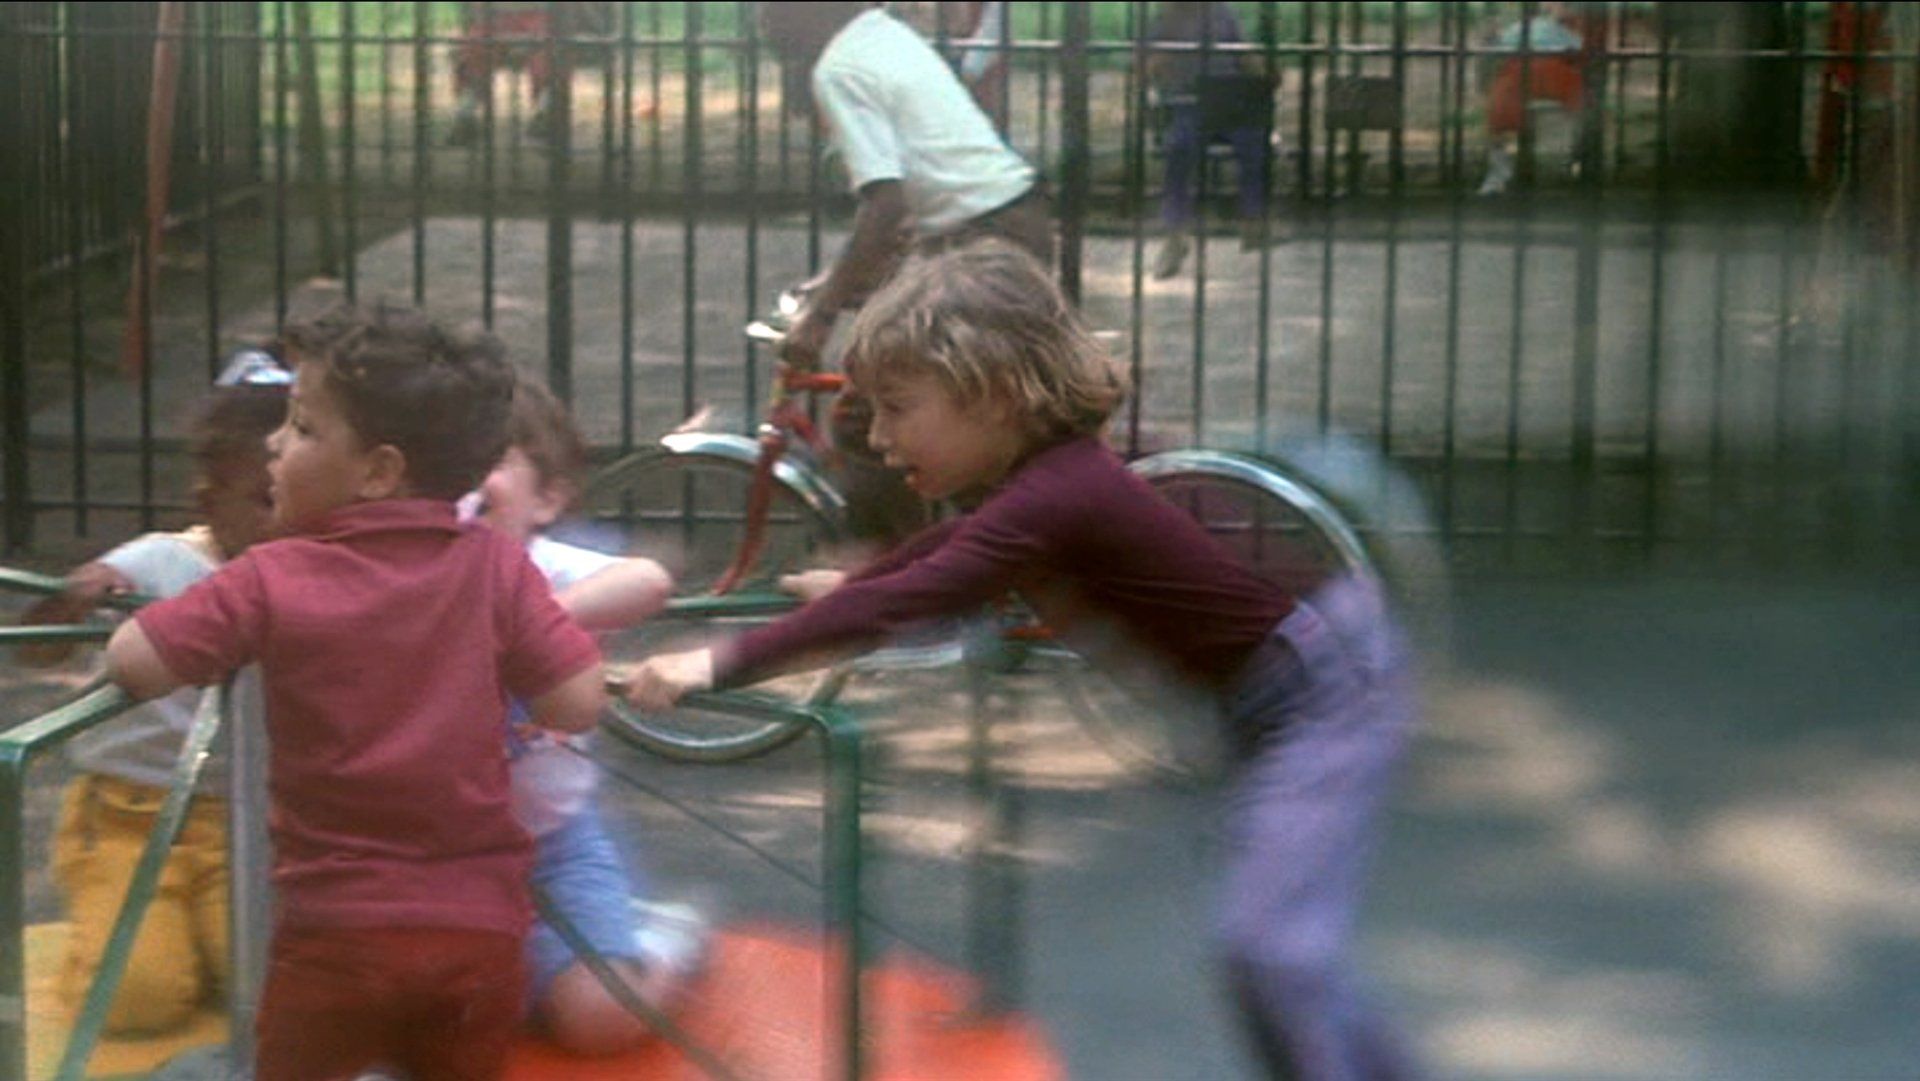 Jason Gould's cameo in the movie at the playground.